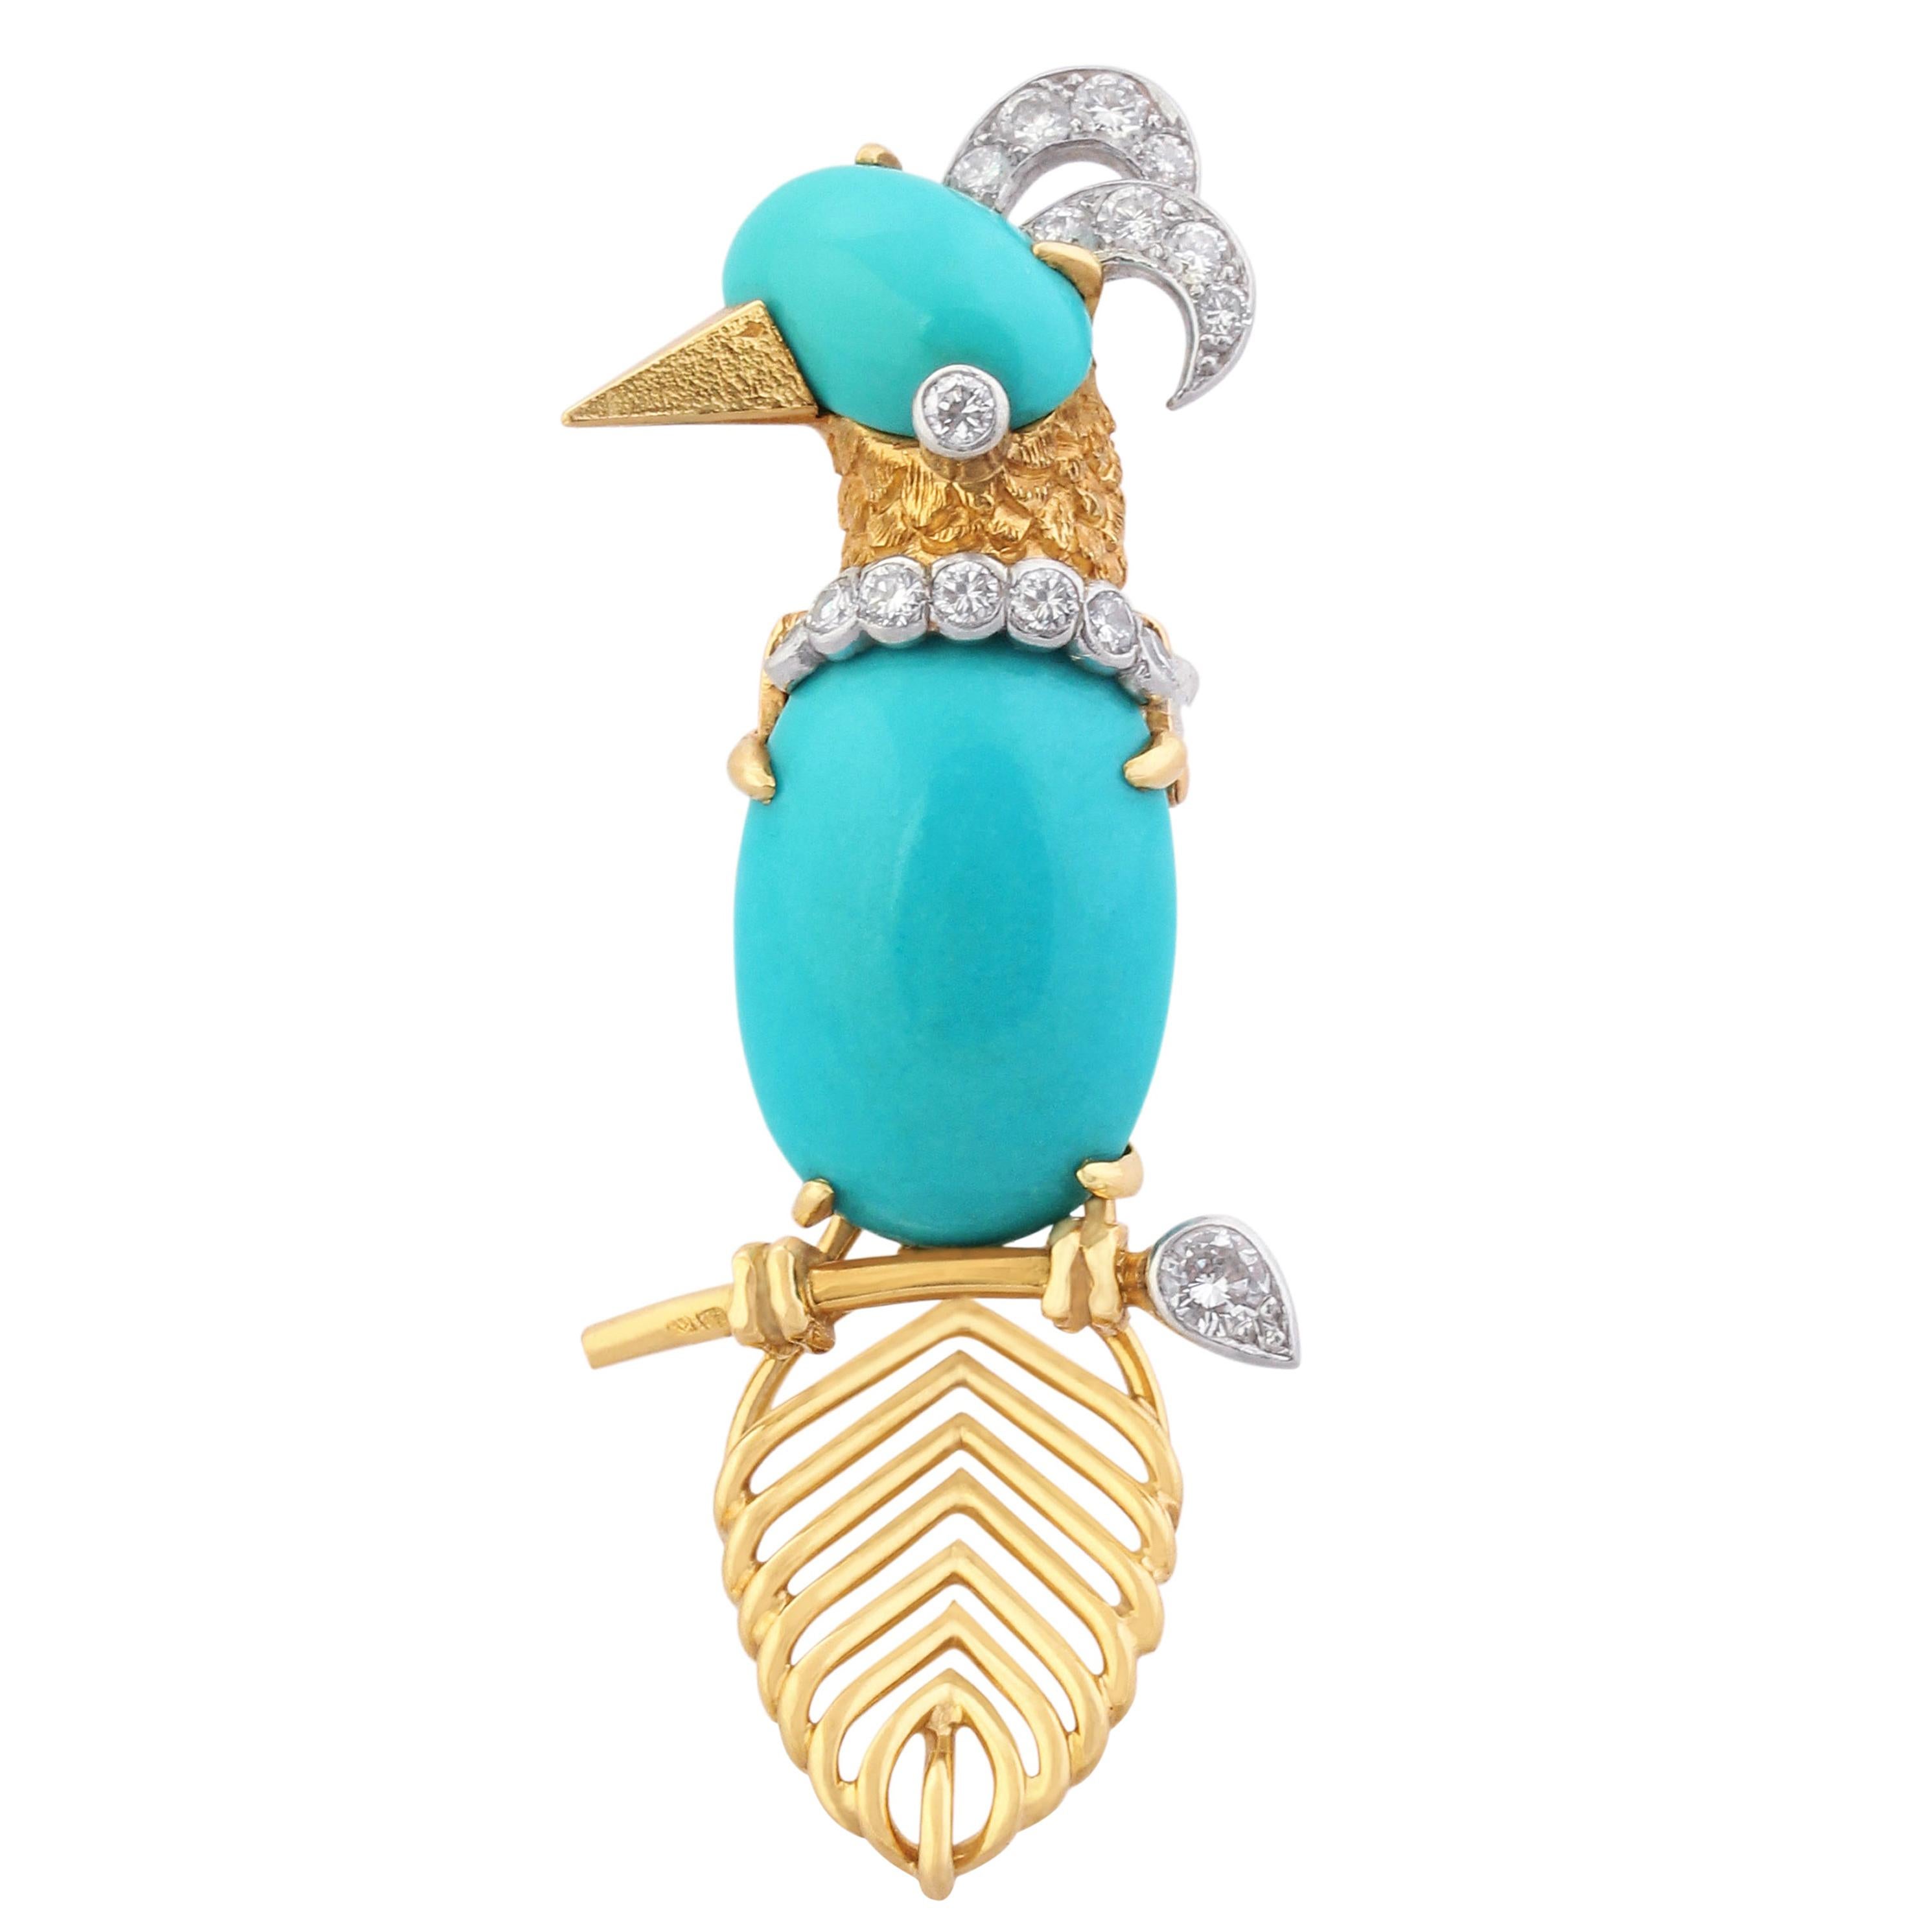 Gold, Diamond and Turquoise Woodpecker Brooch by Cartier